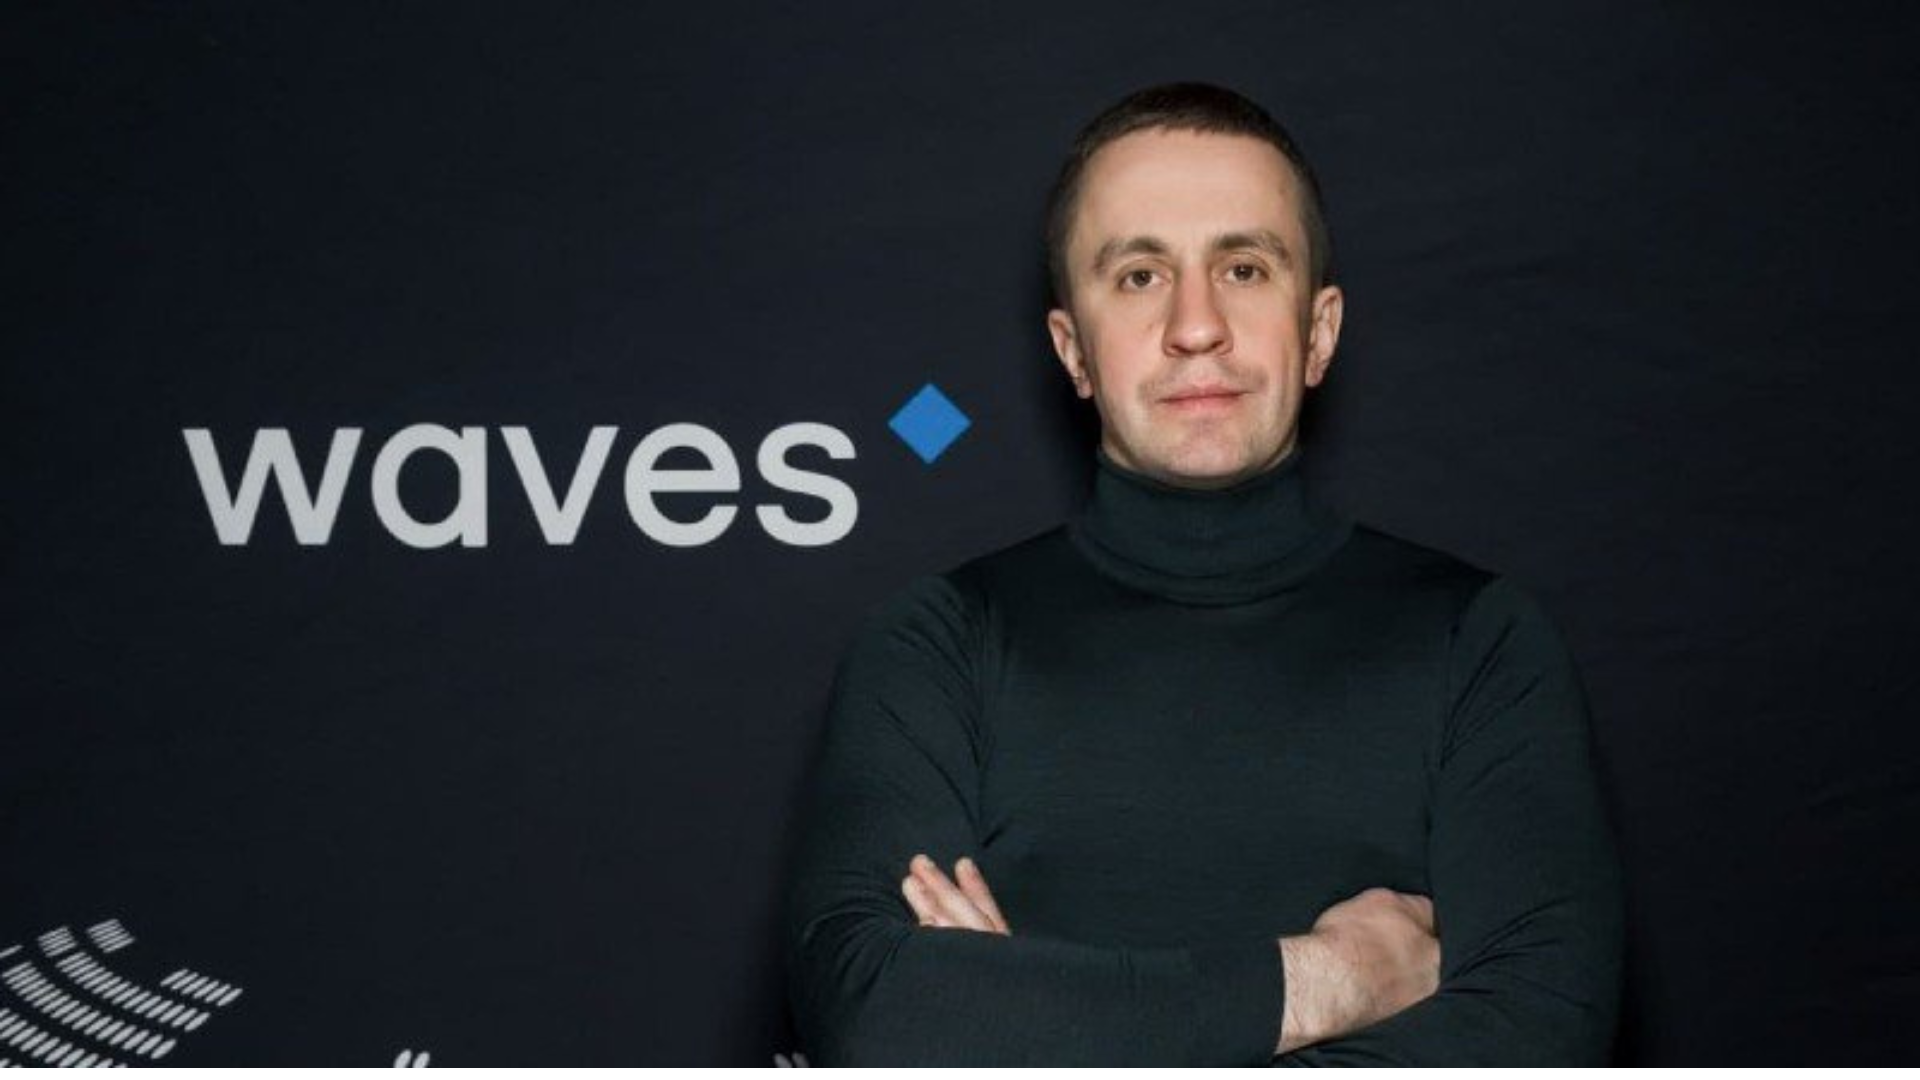 Founder and CEO Waves, Sasha Ivanov. Foto: Getty Images.